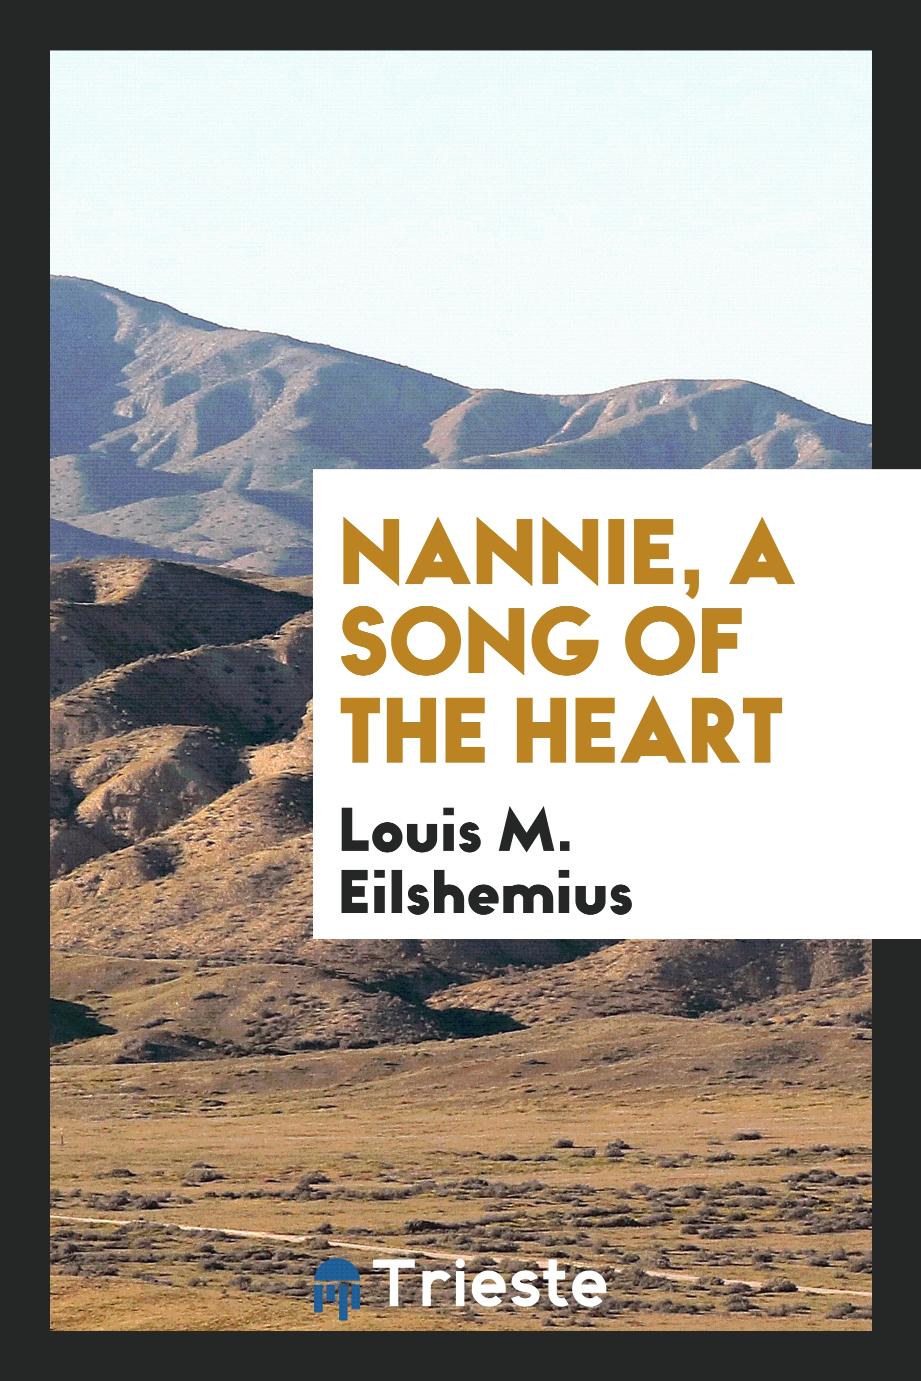 Nannie, a song of the heart